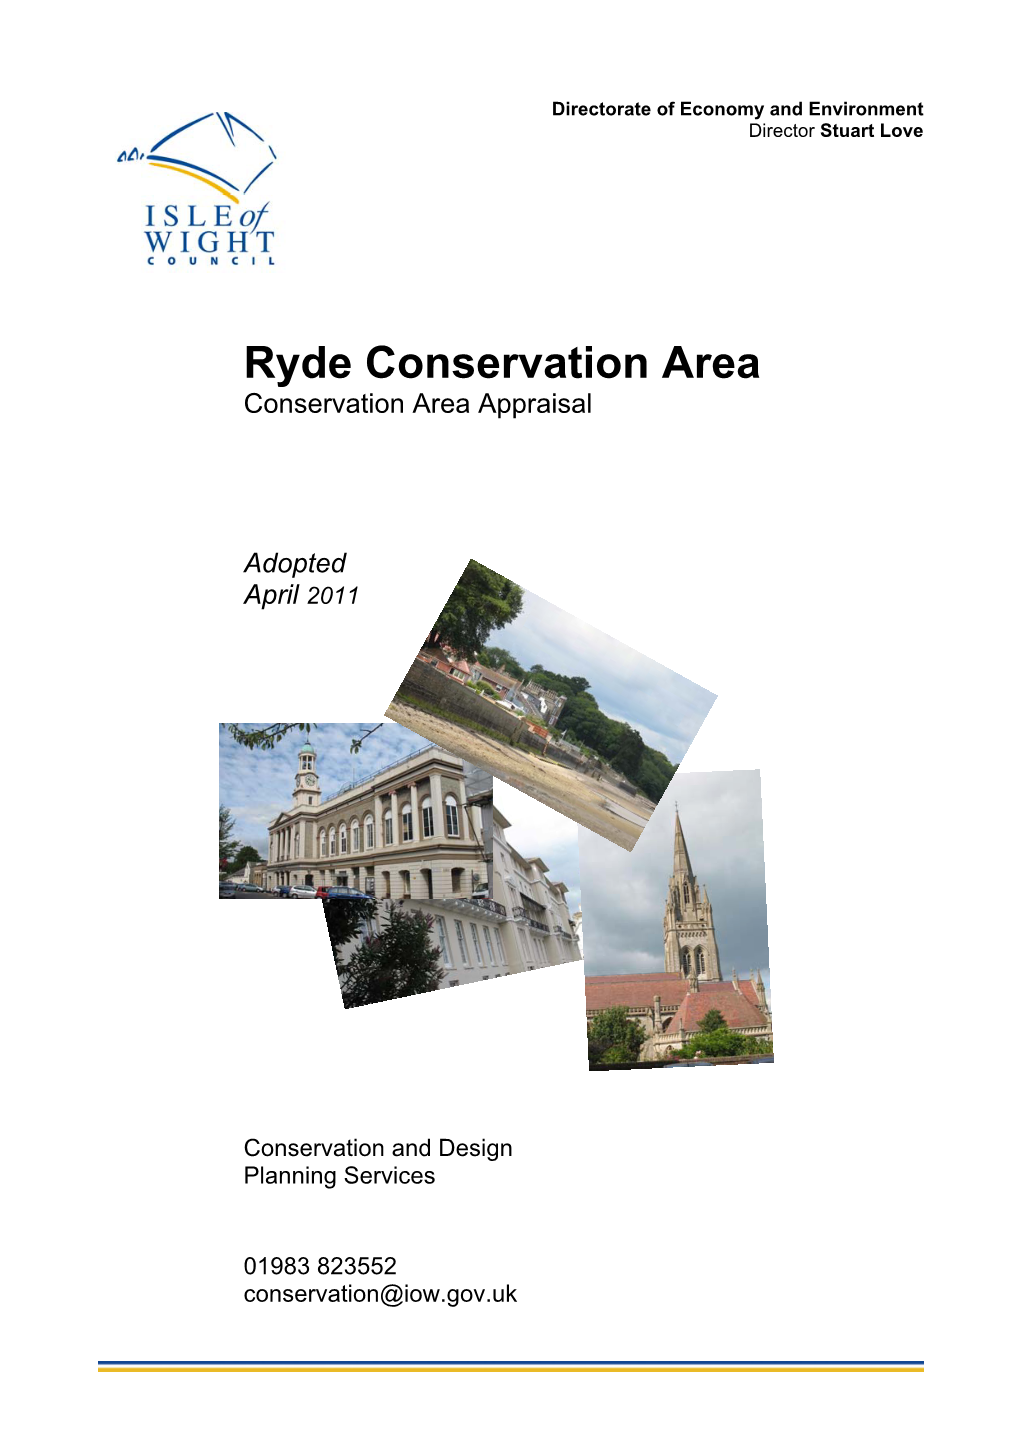 Ryde Conservation Area Character Appraisal